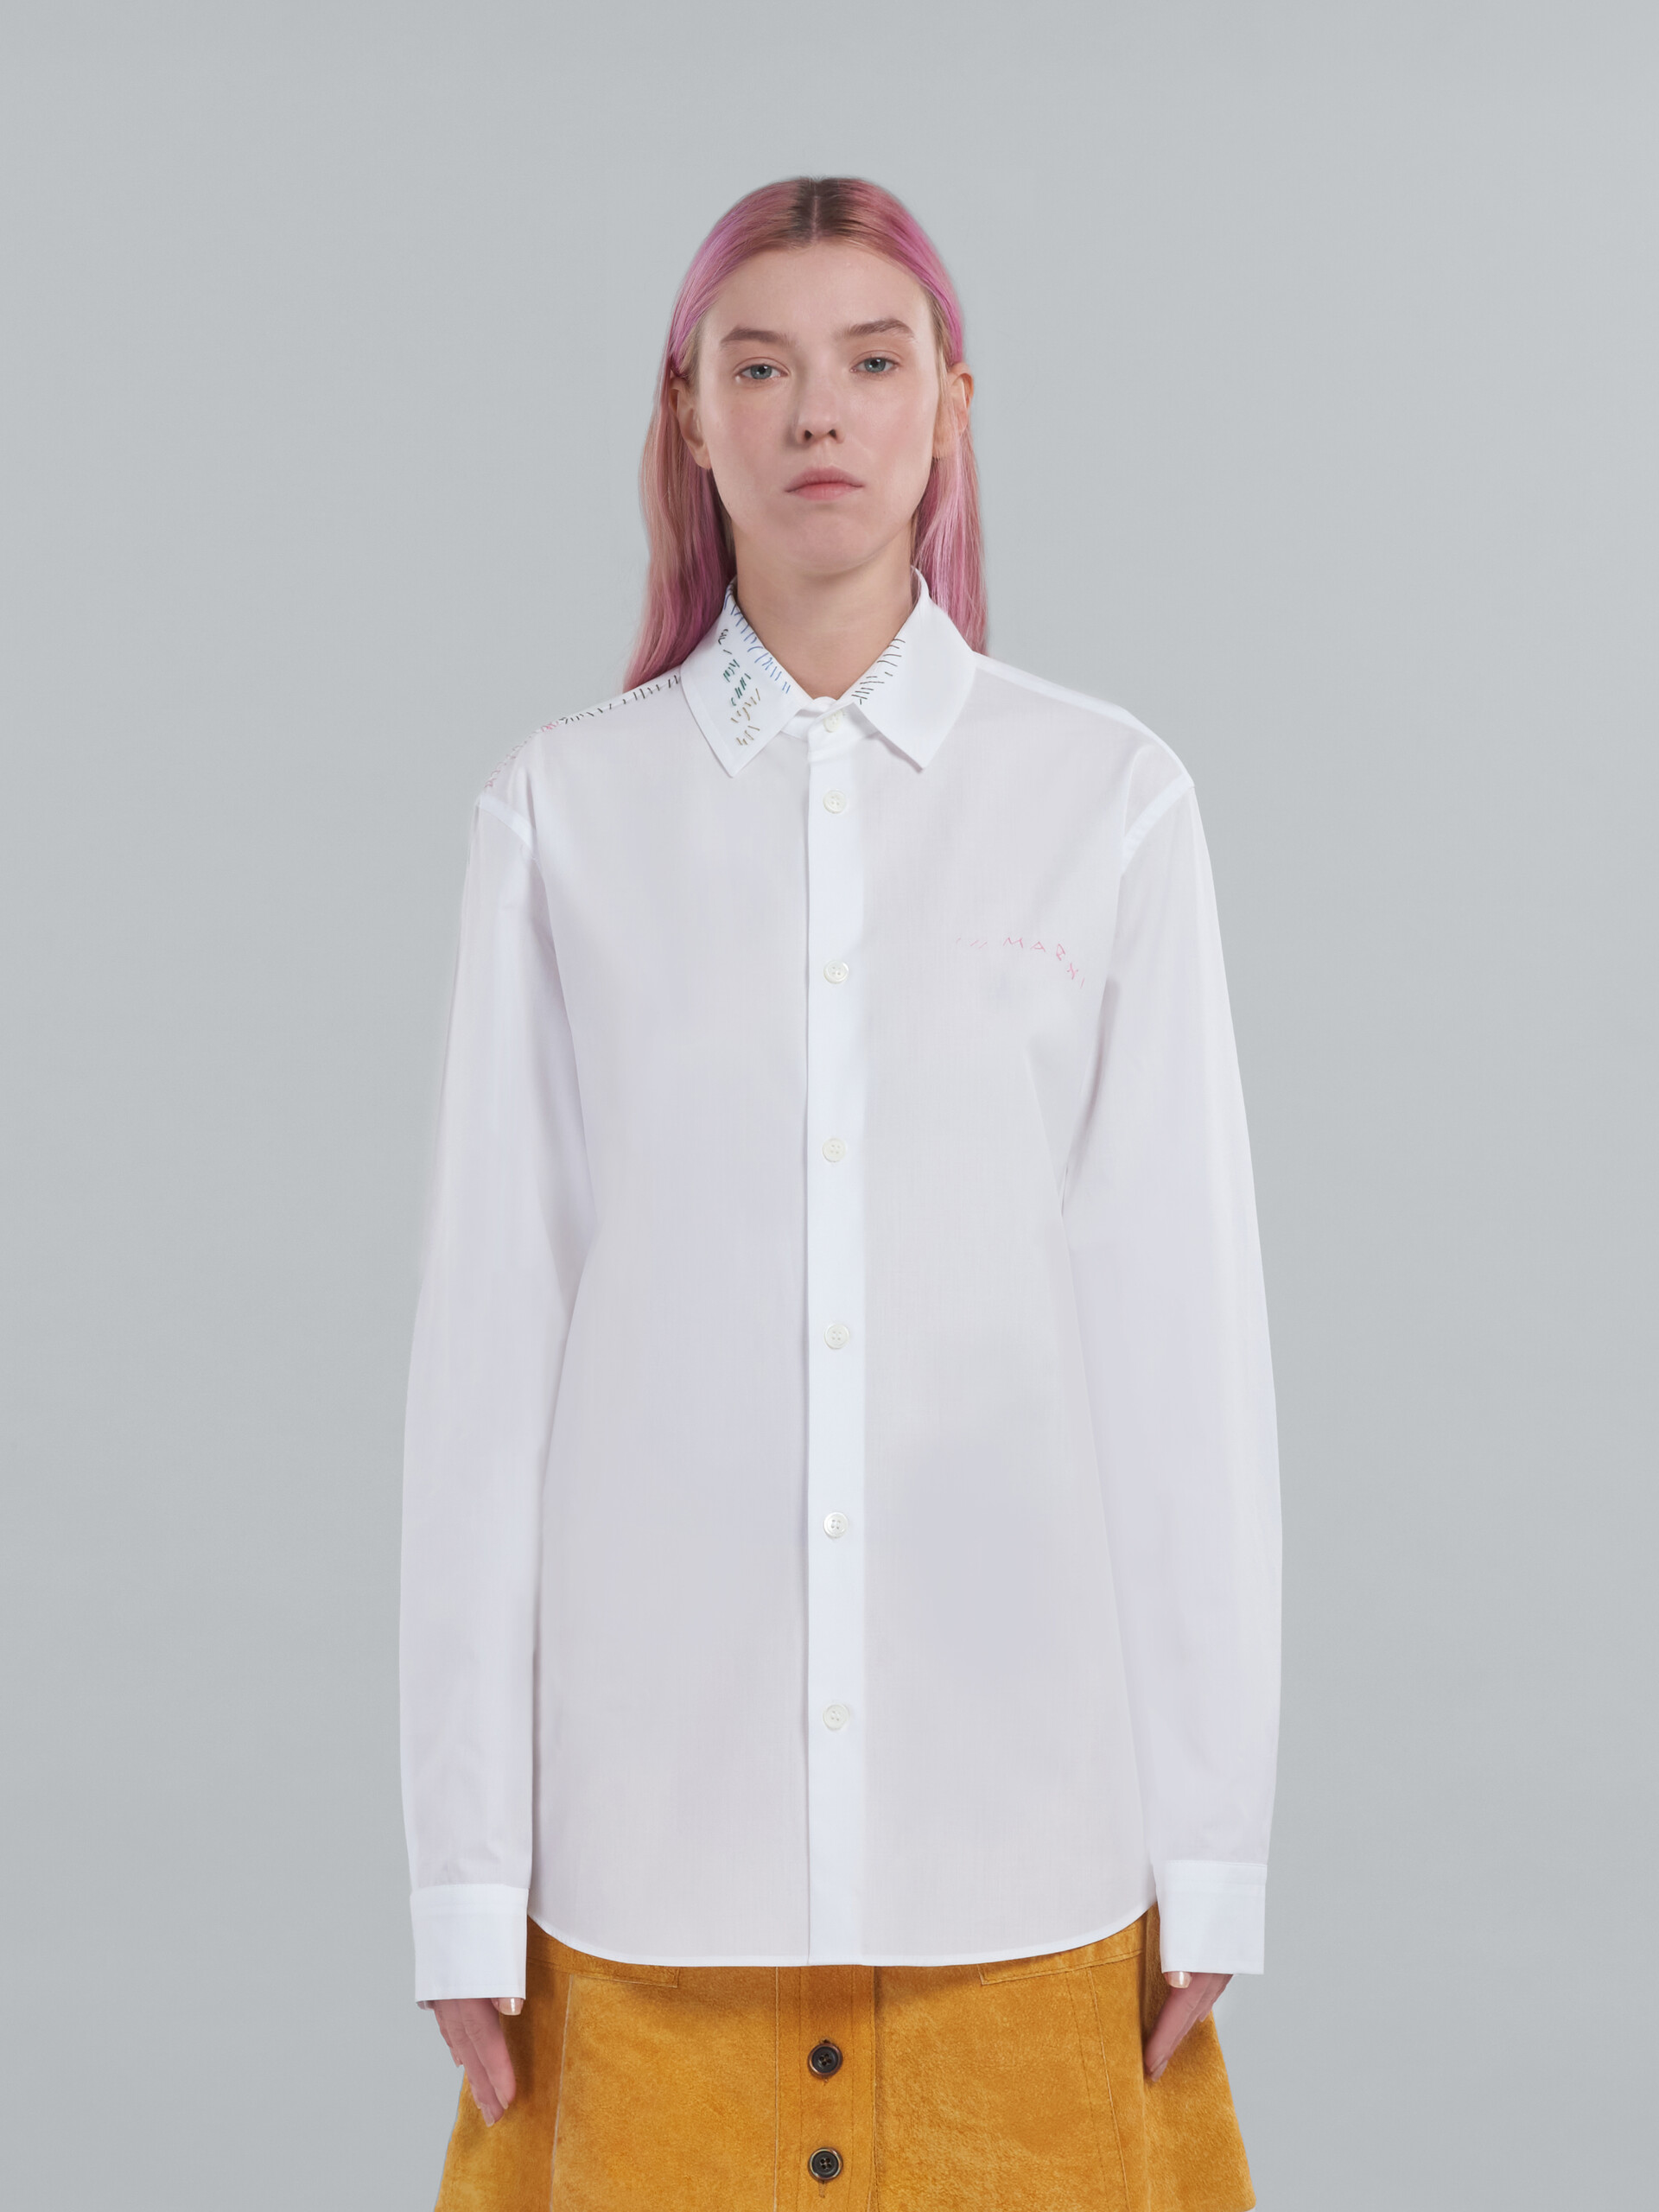 White cotton shirt with embroidery - Shirts - Image 2